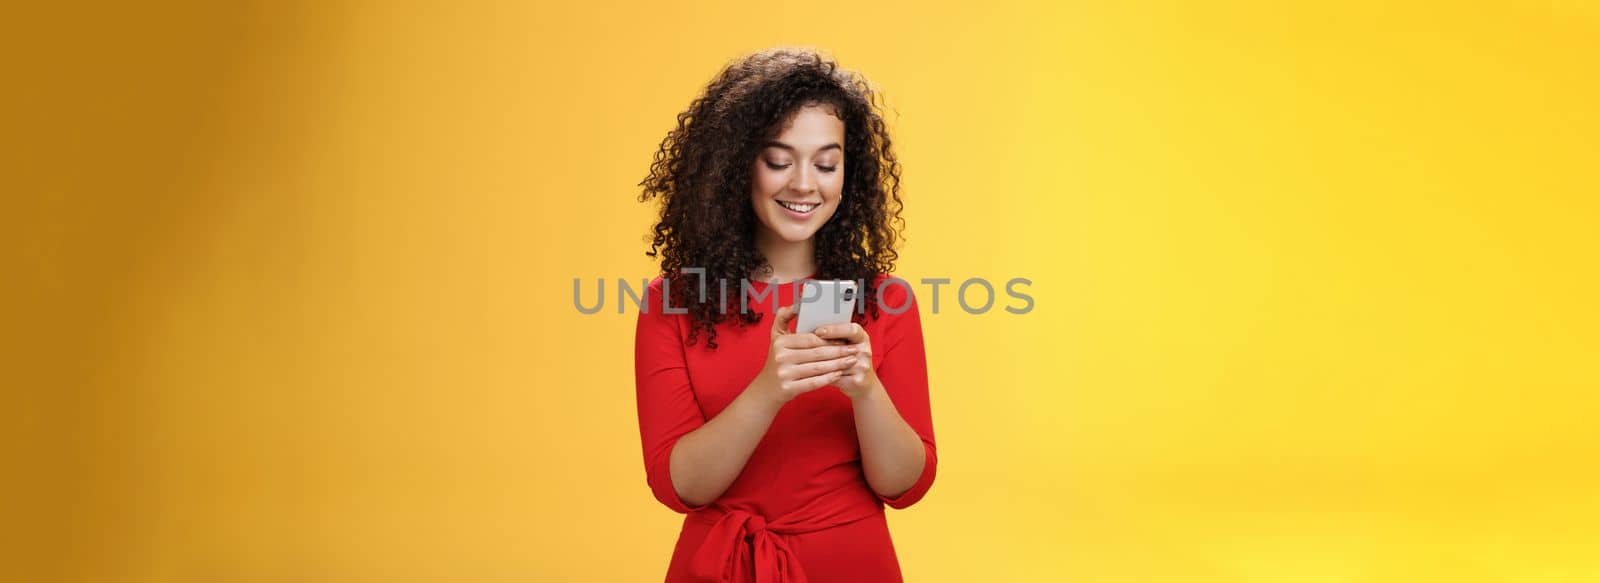 Lifestyle. Gil sending message spread news across social network having party inviting friends via smartphone holding mobile phone in hands smiling broadly at device screen as posing over yellow background.